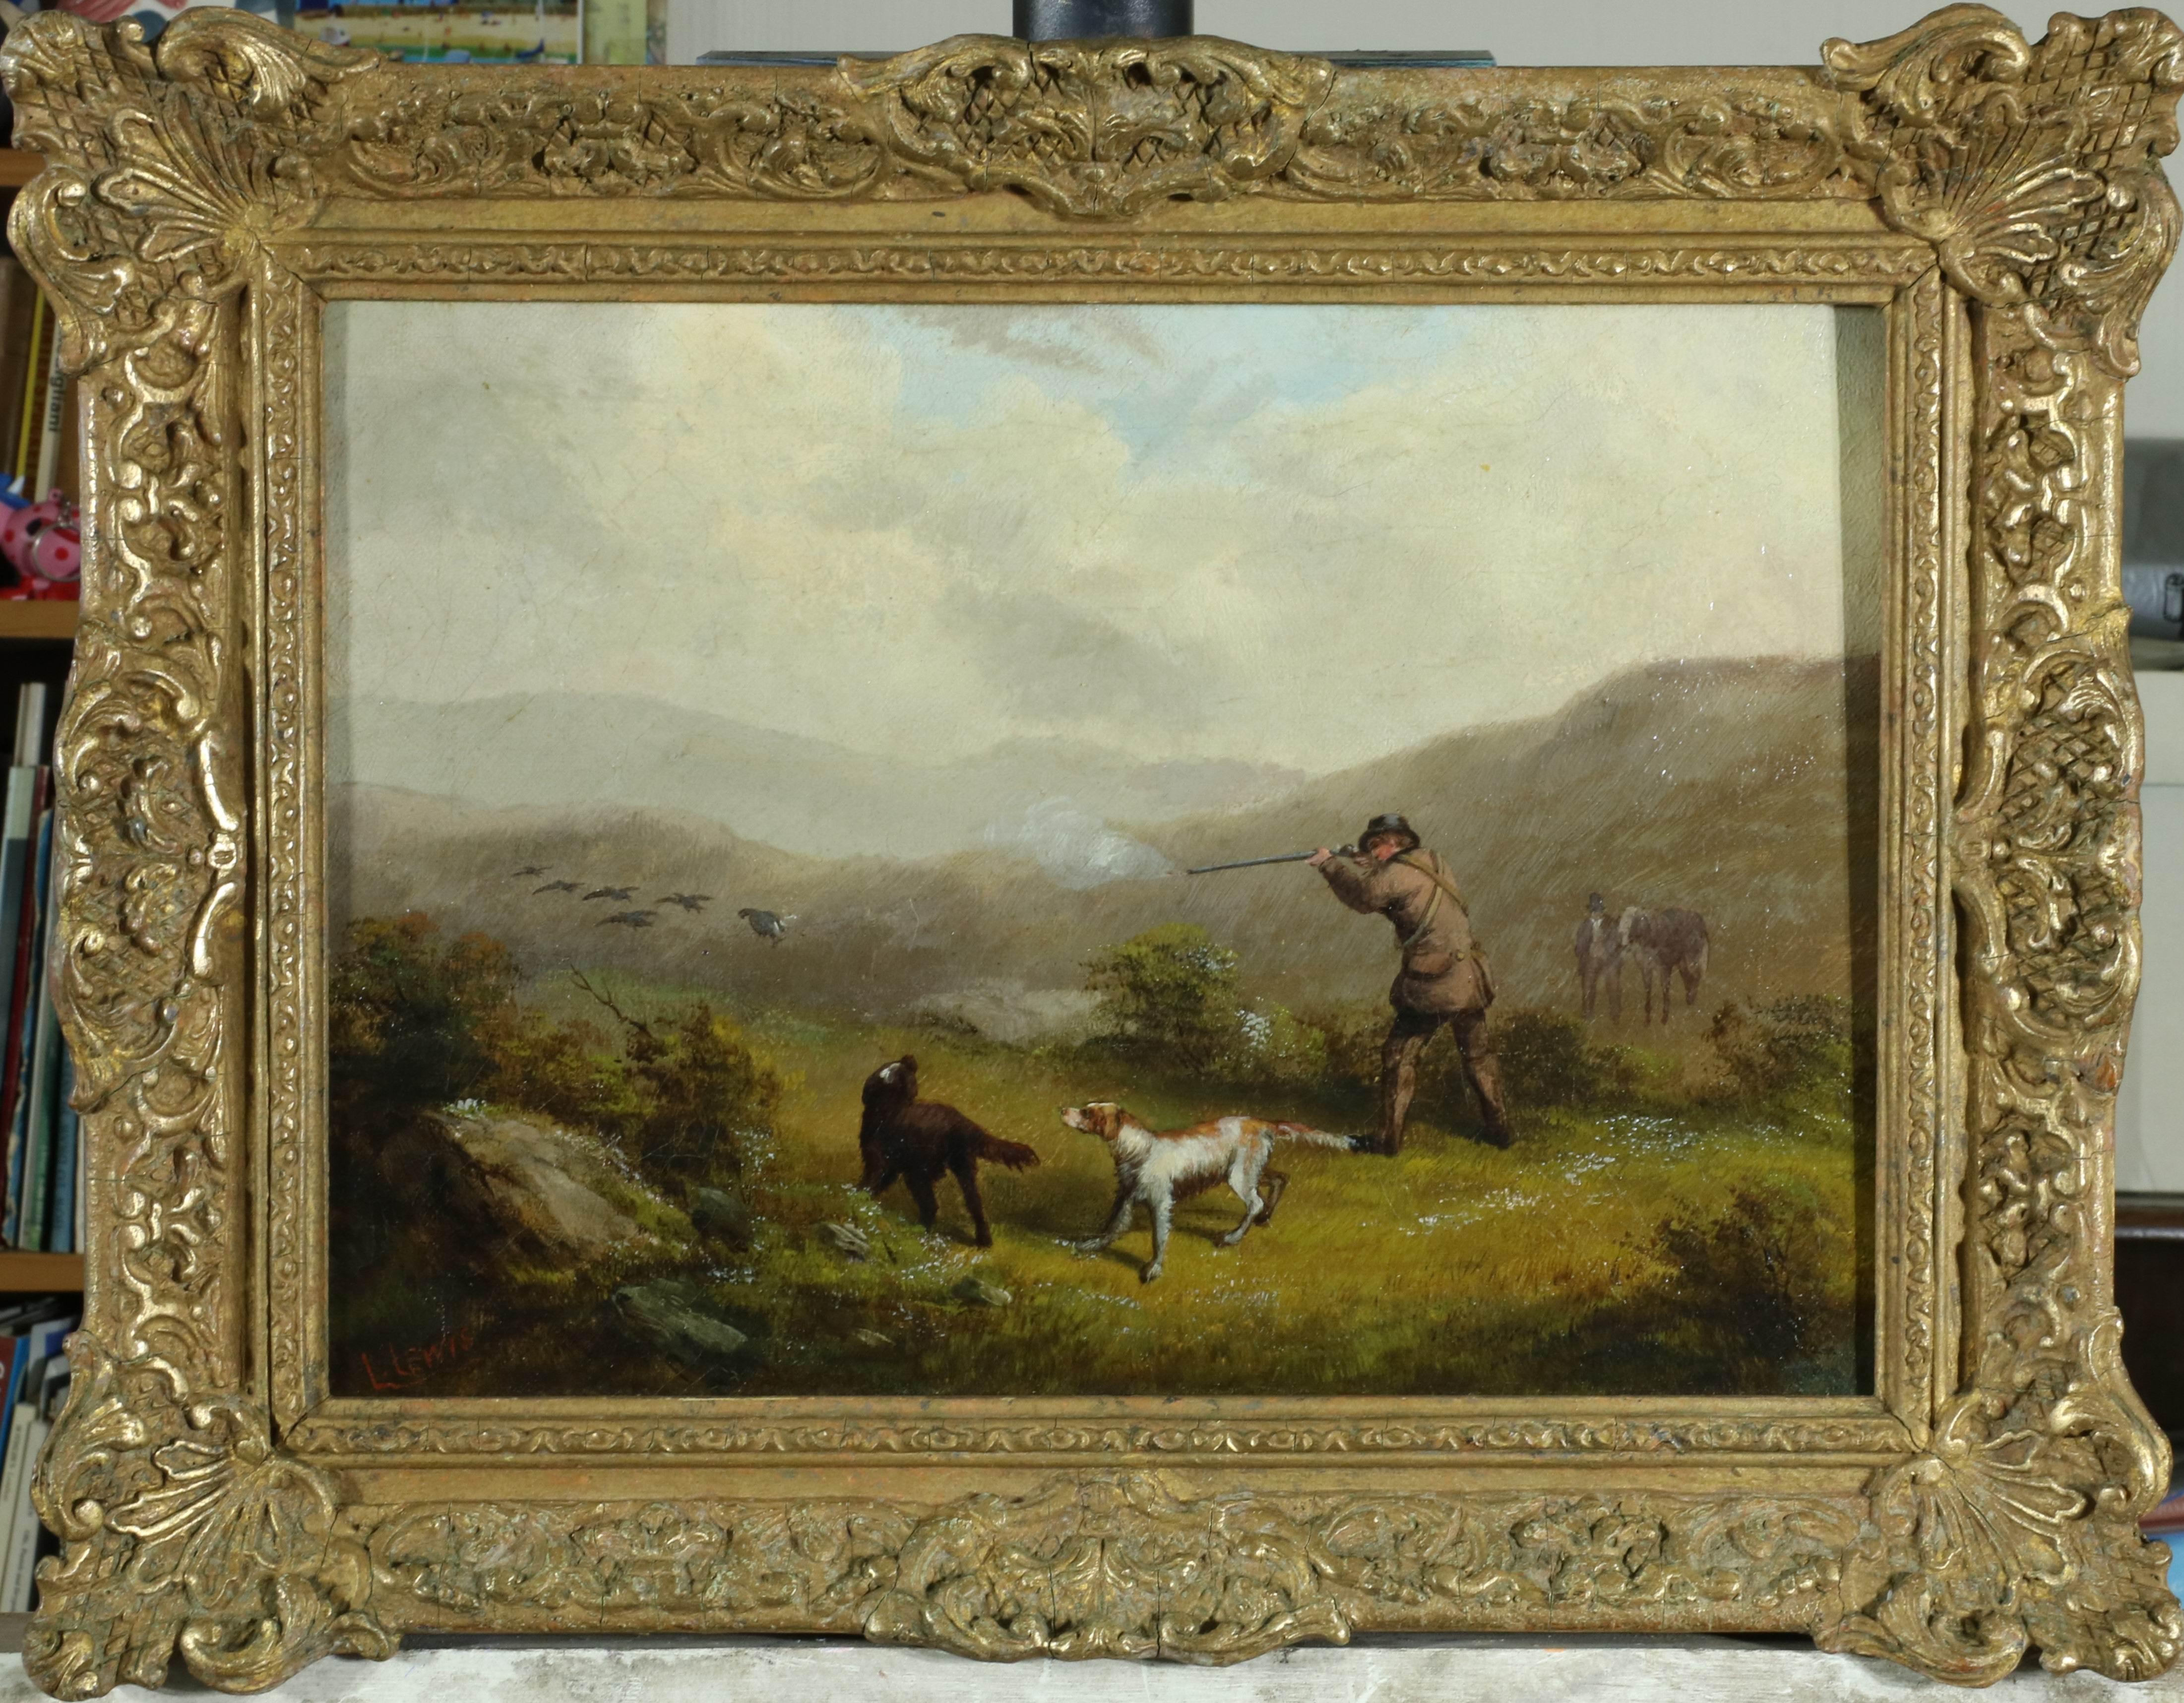 The Grouse Shoot 19th Century Gun with Dogs and grouse in hilly landscape, Oil  - Painting by Lennard Lewis